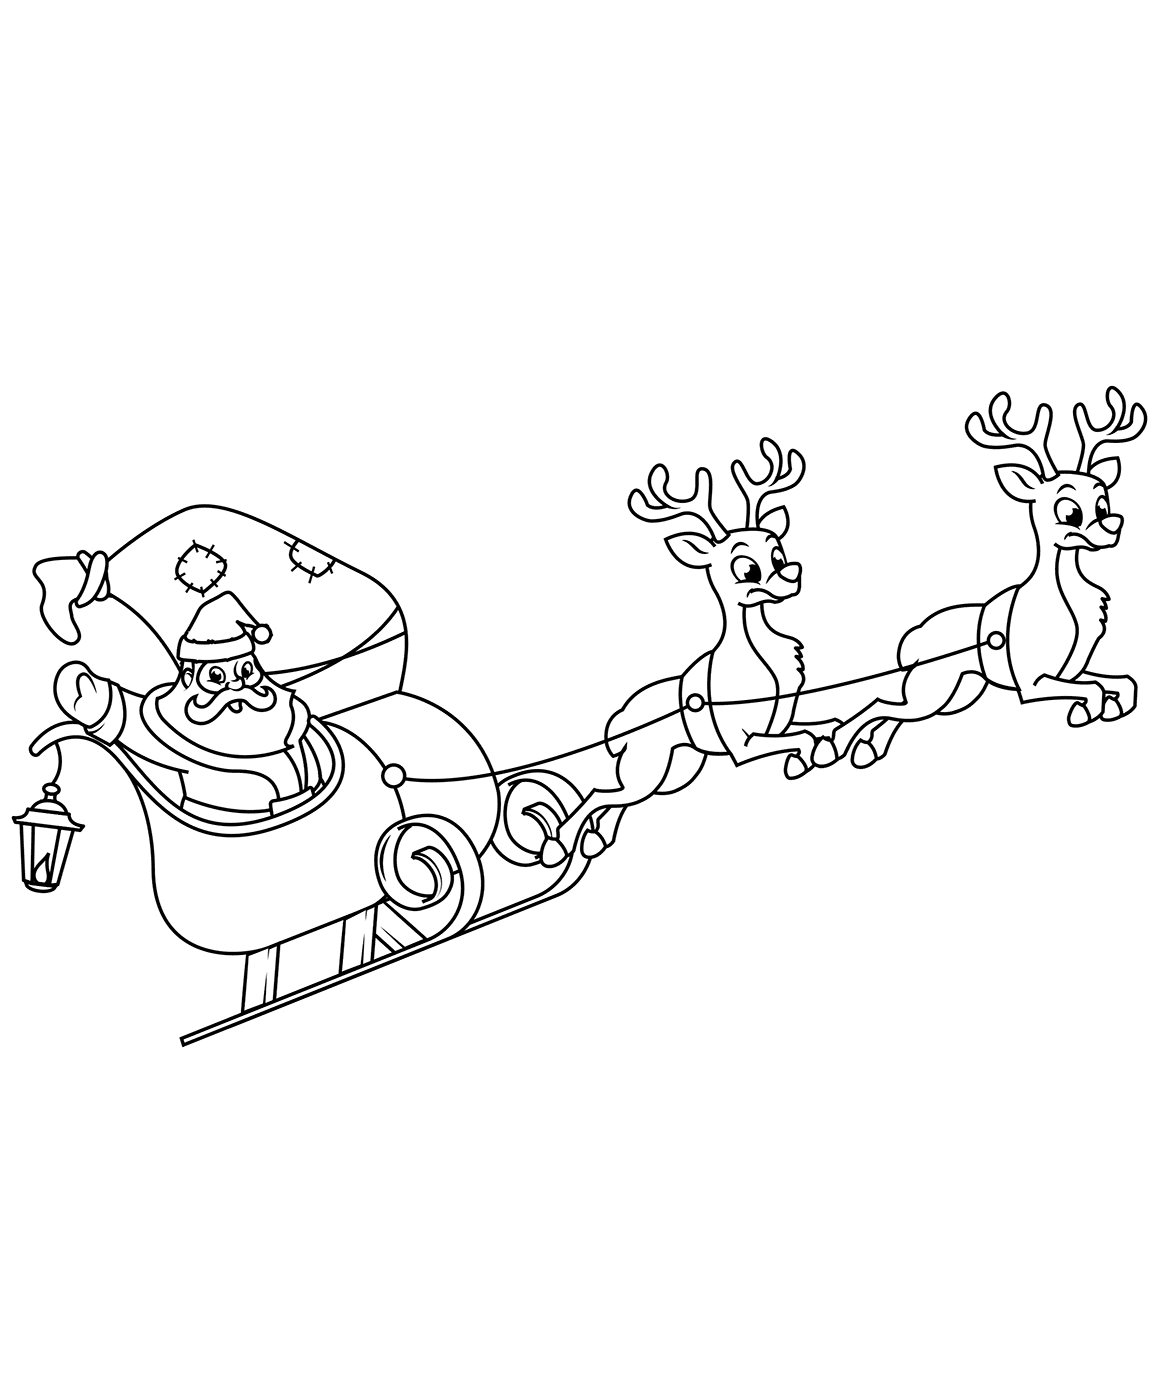 Santa Claus Riding His Sleigh Christmas Coloring Pages   Coloring Cool